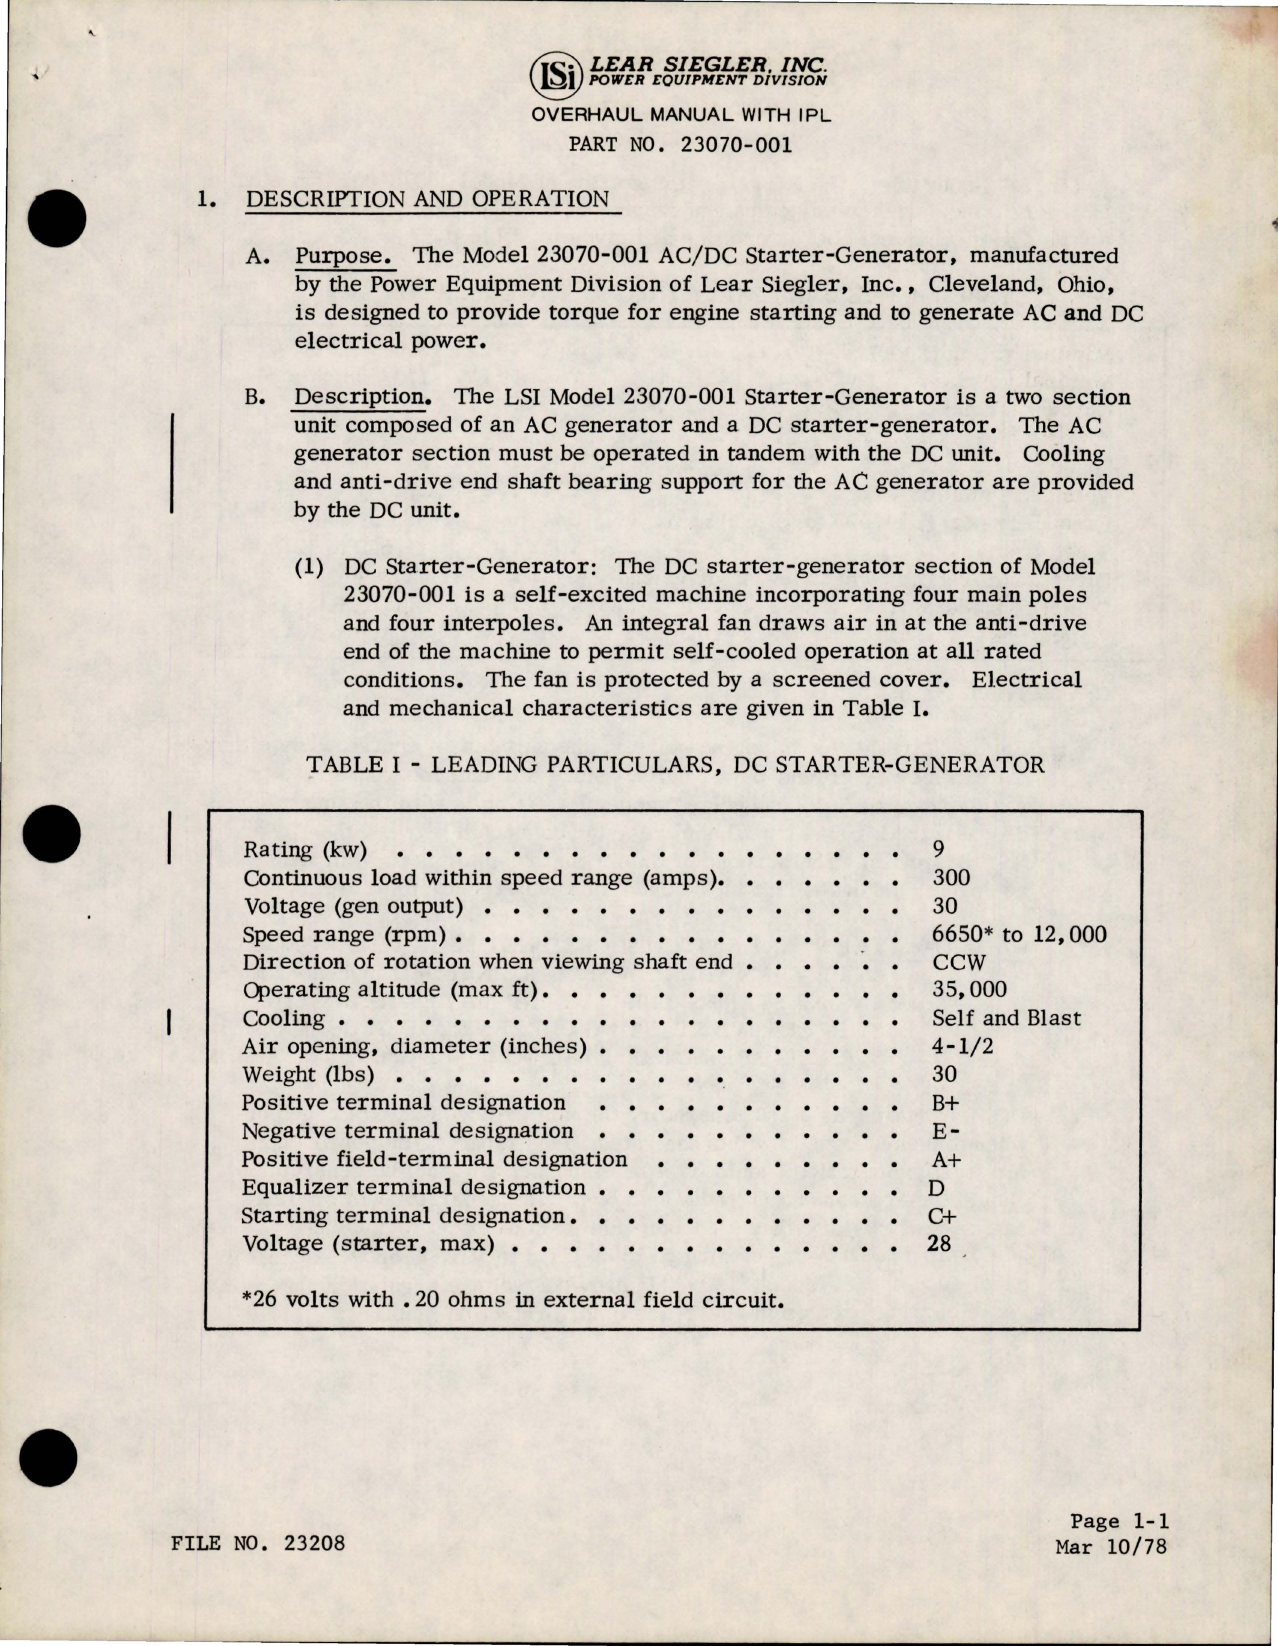 Sample page 9 from AirCorps Library document: Overhaul with Illustrated Parts List for AC-DC Starter-Generator - Model 23070-001 